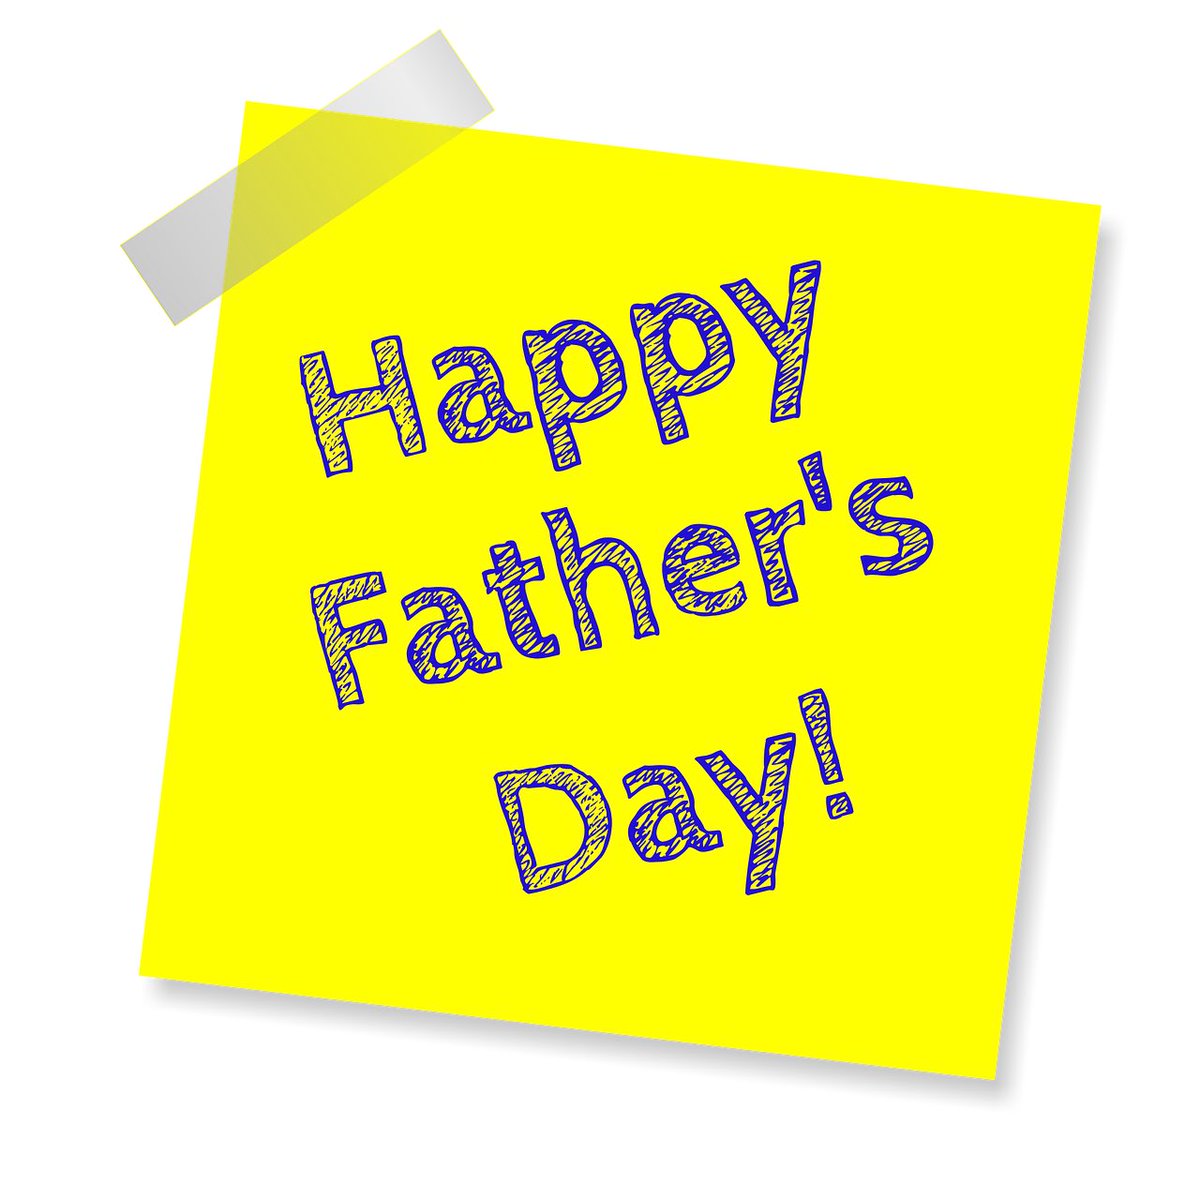 Happy Father’s Day to all the Dads out there! They are our role models, champions, supporters, and teachers, and inspire us to be the best we can be. Thank you for everything you do! ❤️ #yql #lethbridge #BrighterTogether